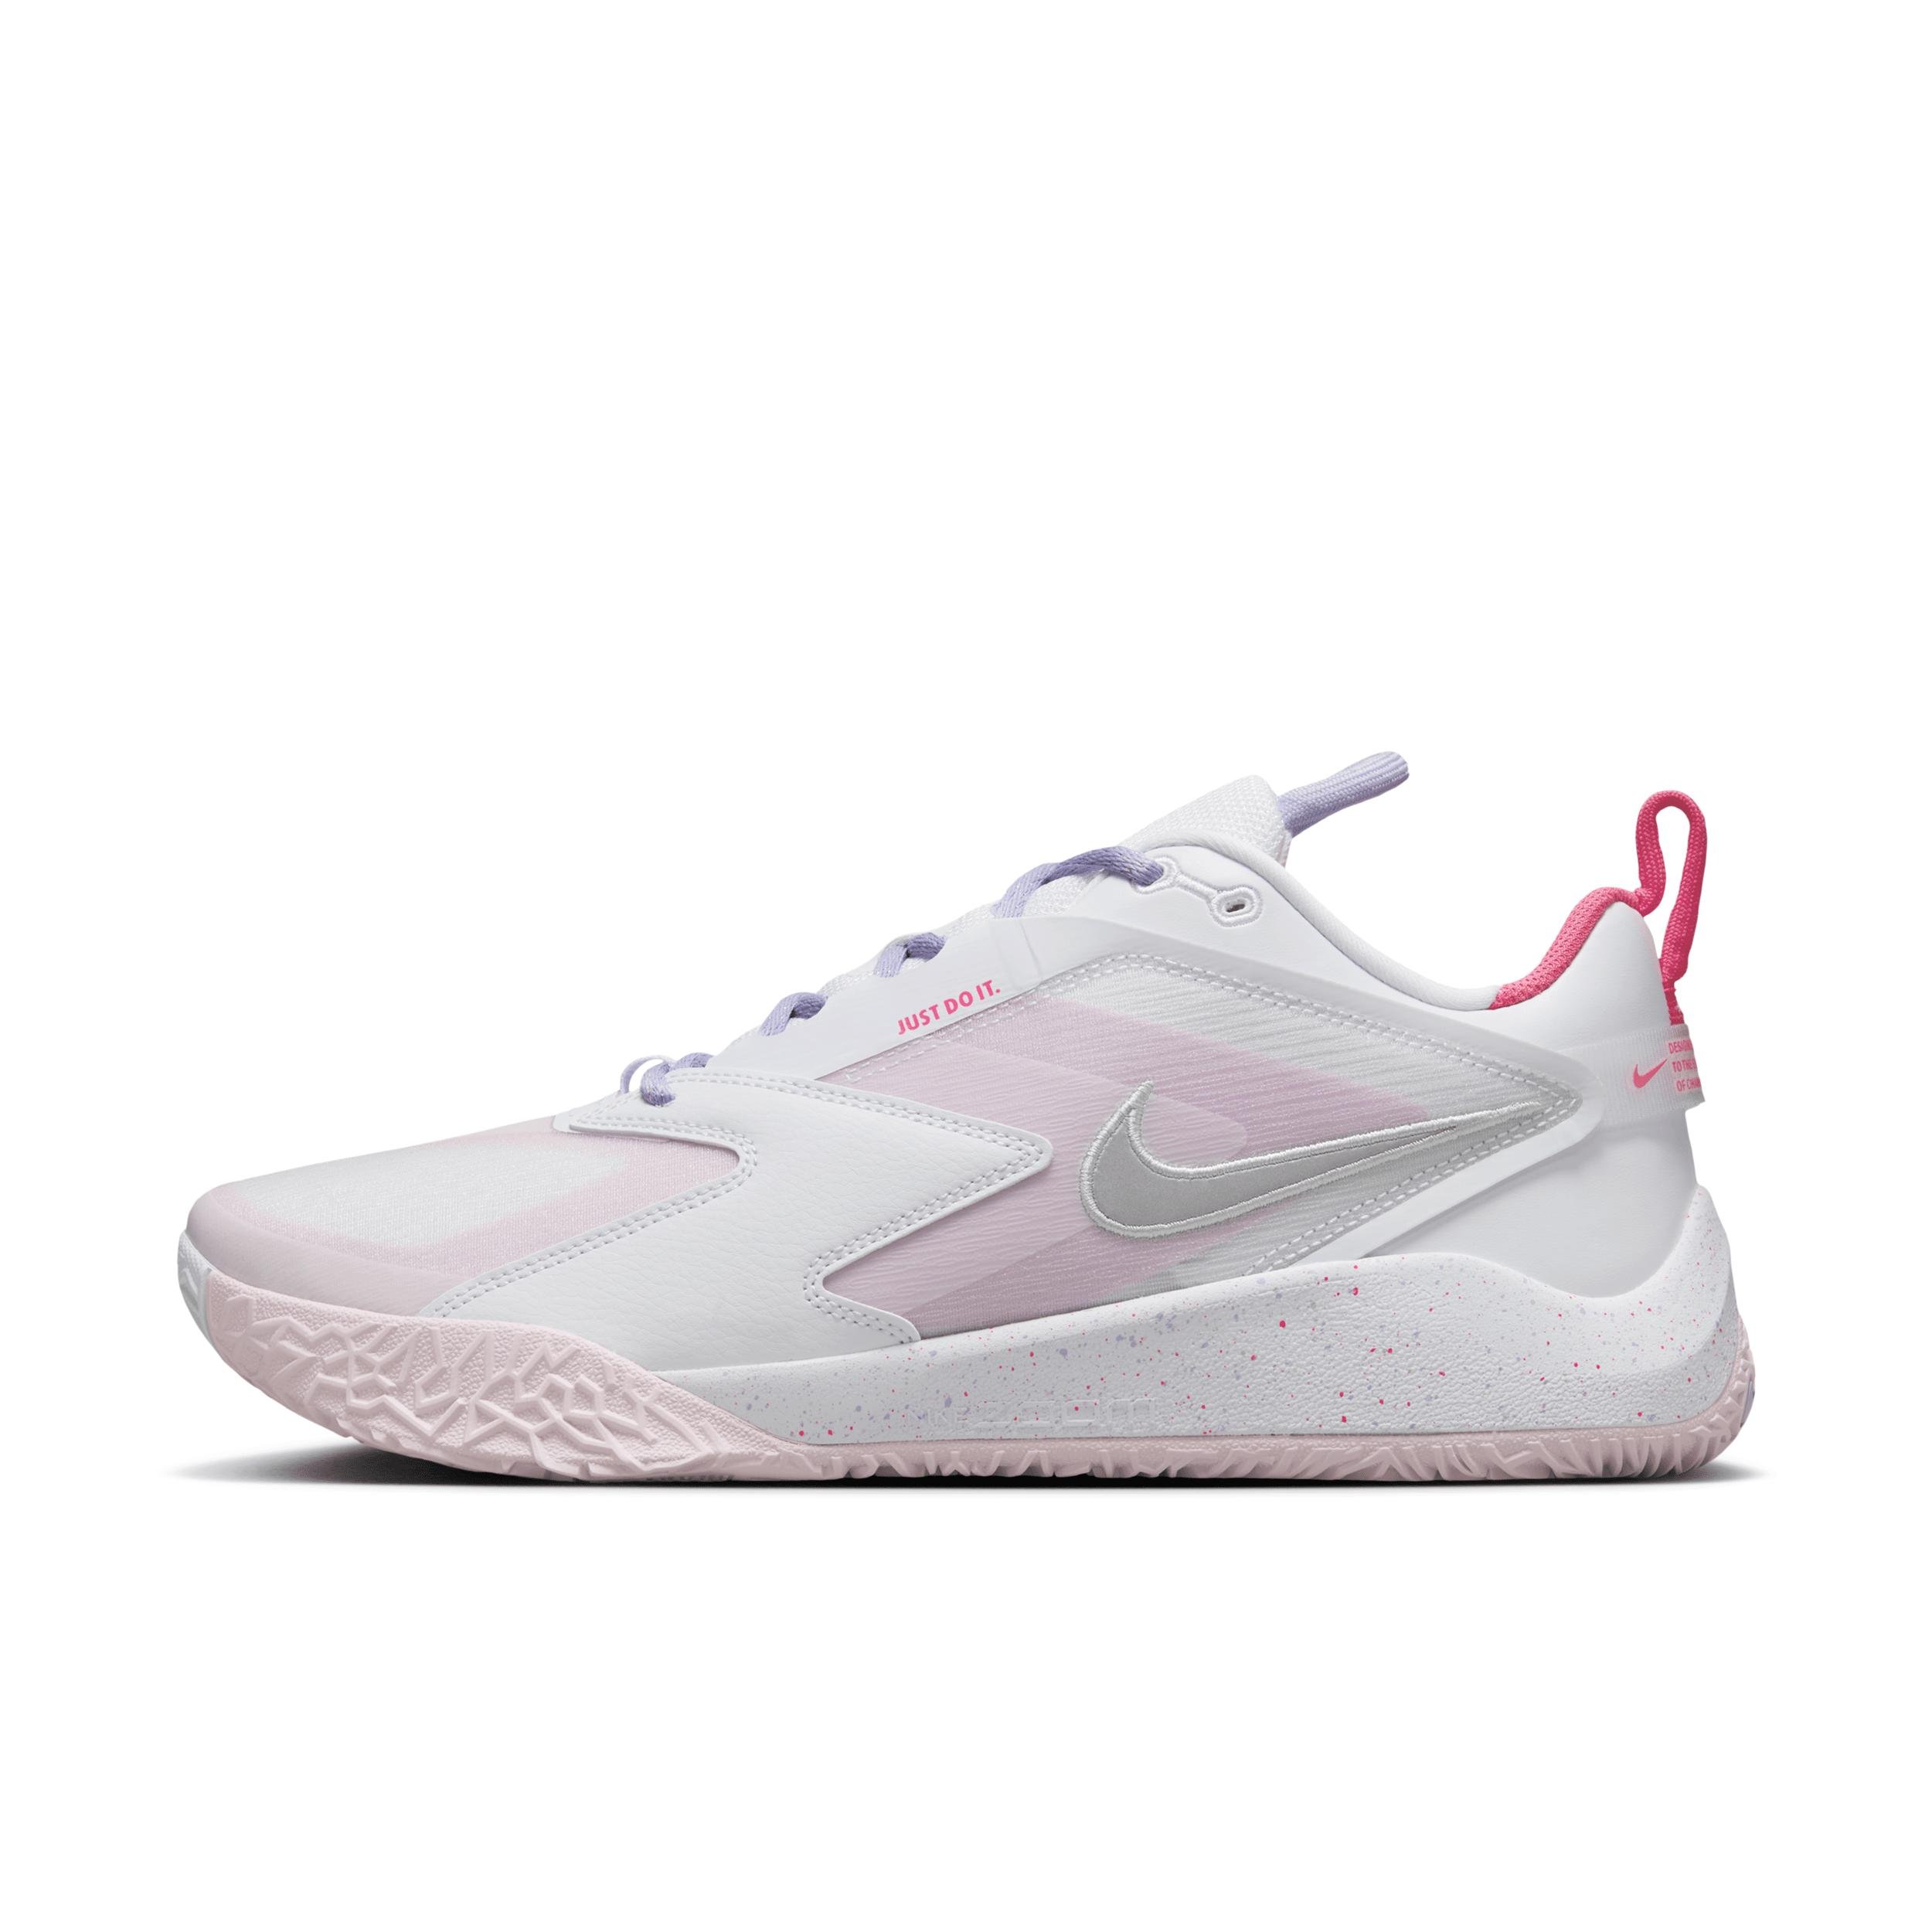 Nike Unisex HyperAce 3 SE Volleyball Shoes by NIKE